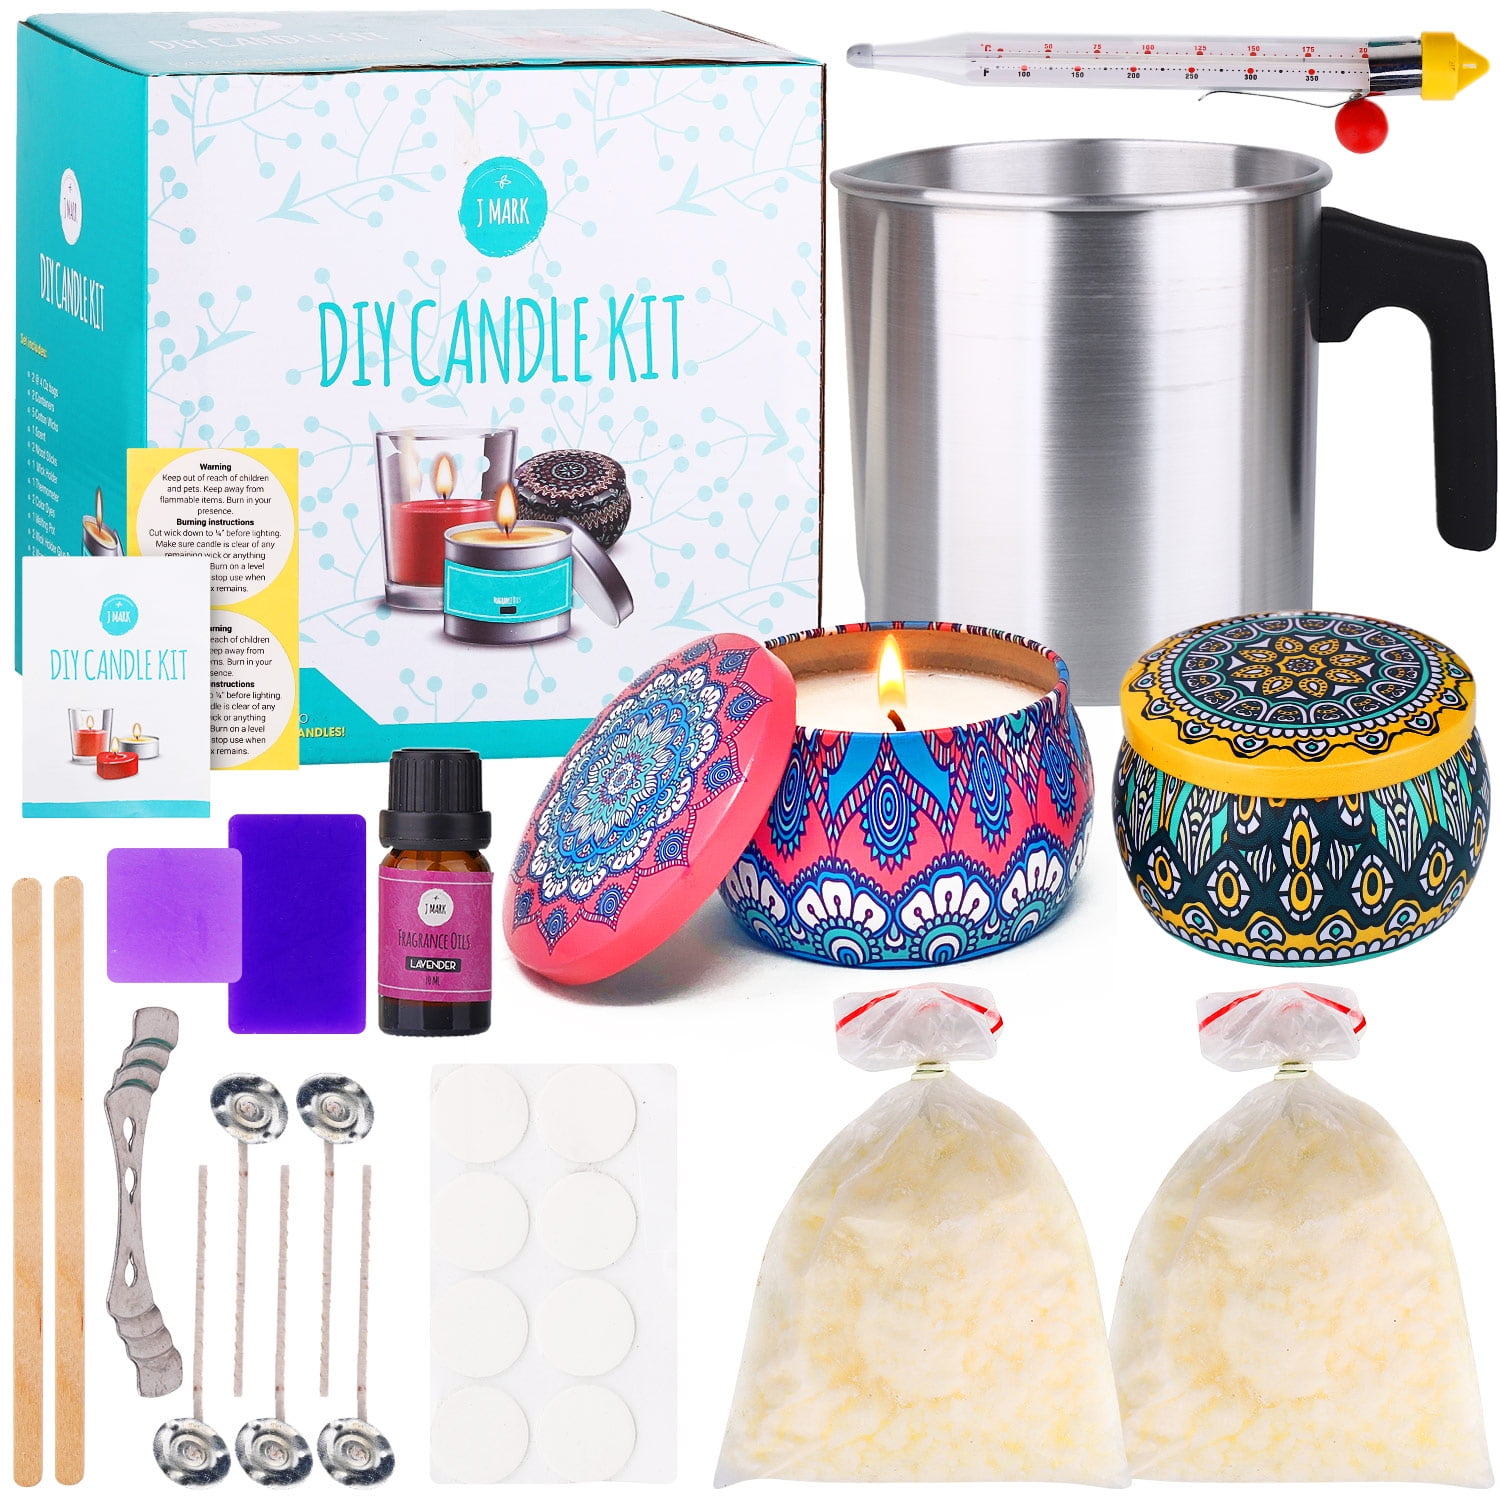 DIY Candle Making Kit for Adults –22 PCS All Inclusive with 2 Decorative  Candle Tins, 2 Soy Wax, Dye, 1 Fragrance Oils, 5 Cotton Wicks, 1 Melting  Pot, 1 Wick Holder , 2 Color dyes – Art & Crafts 